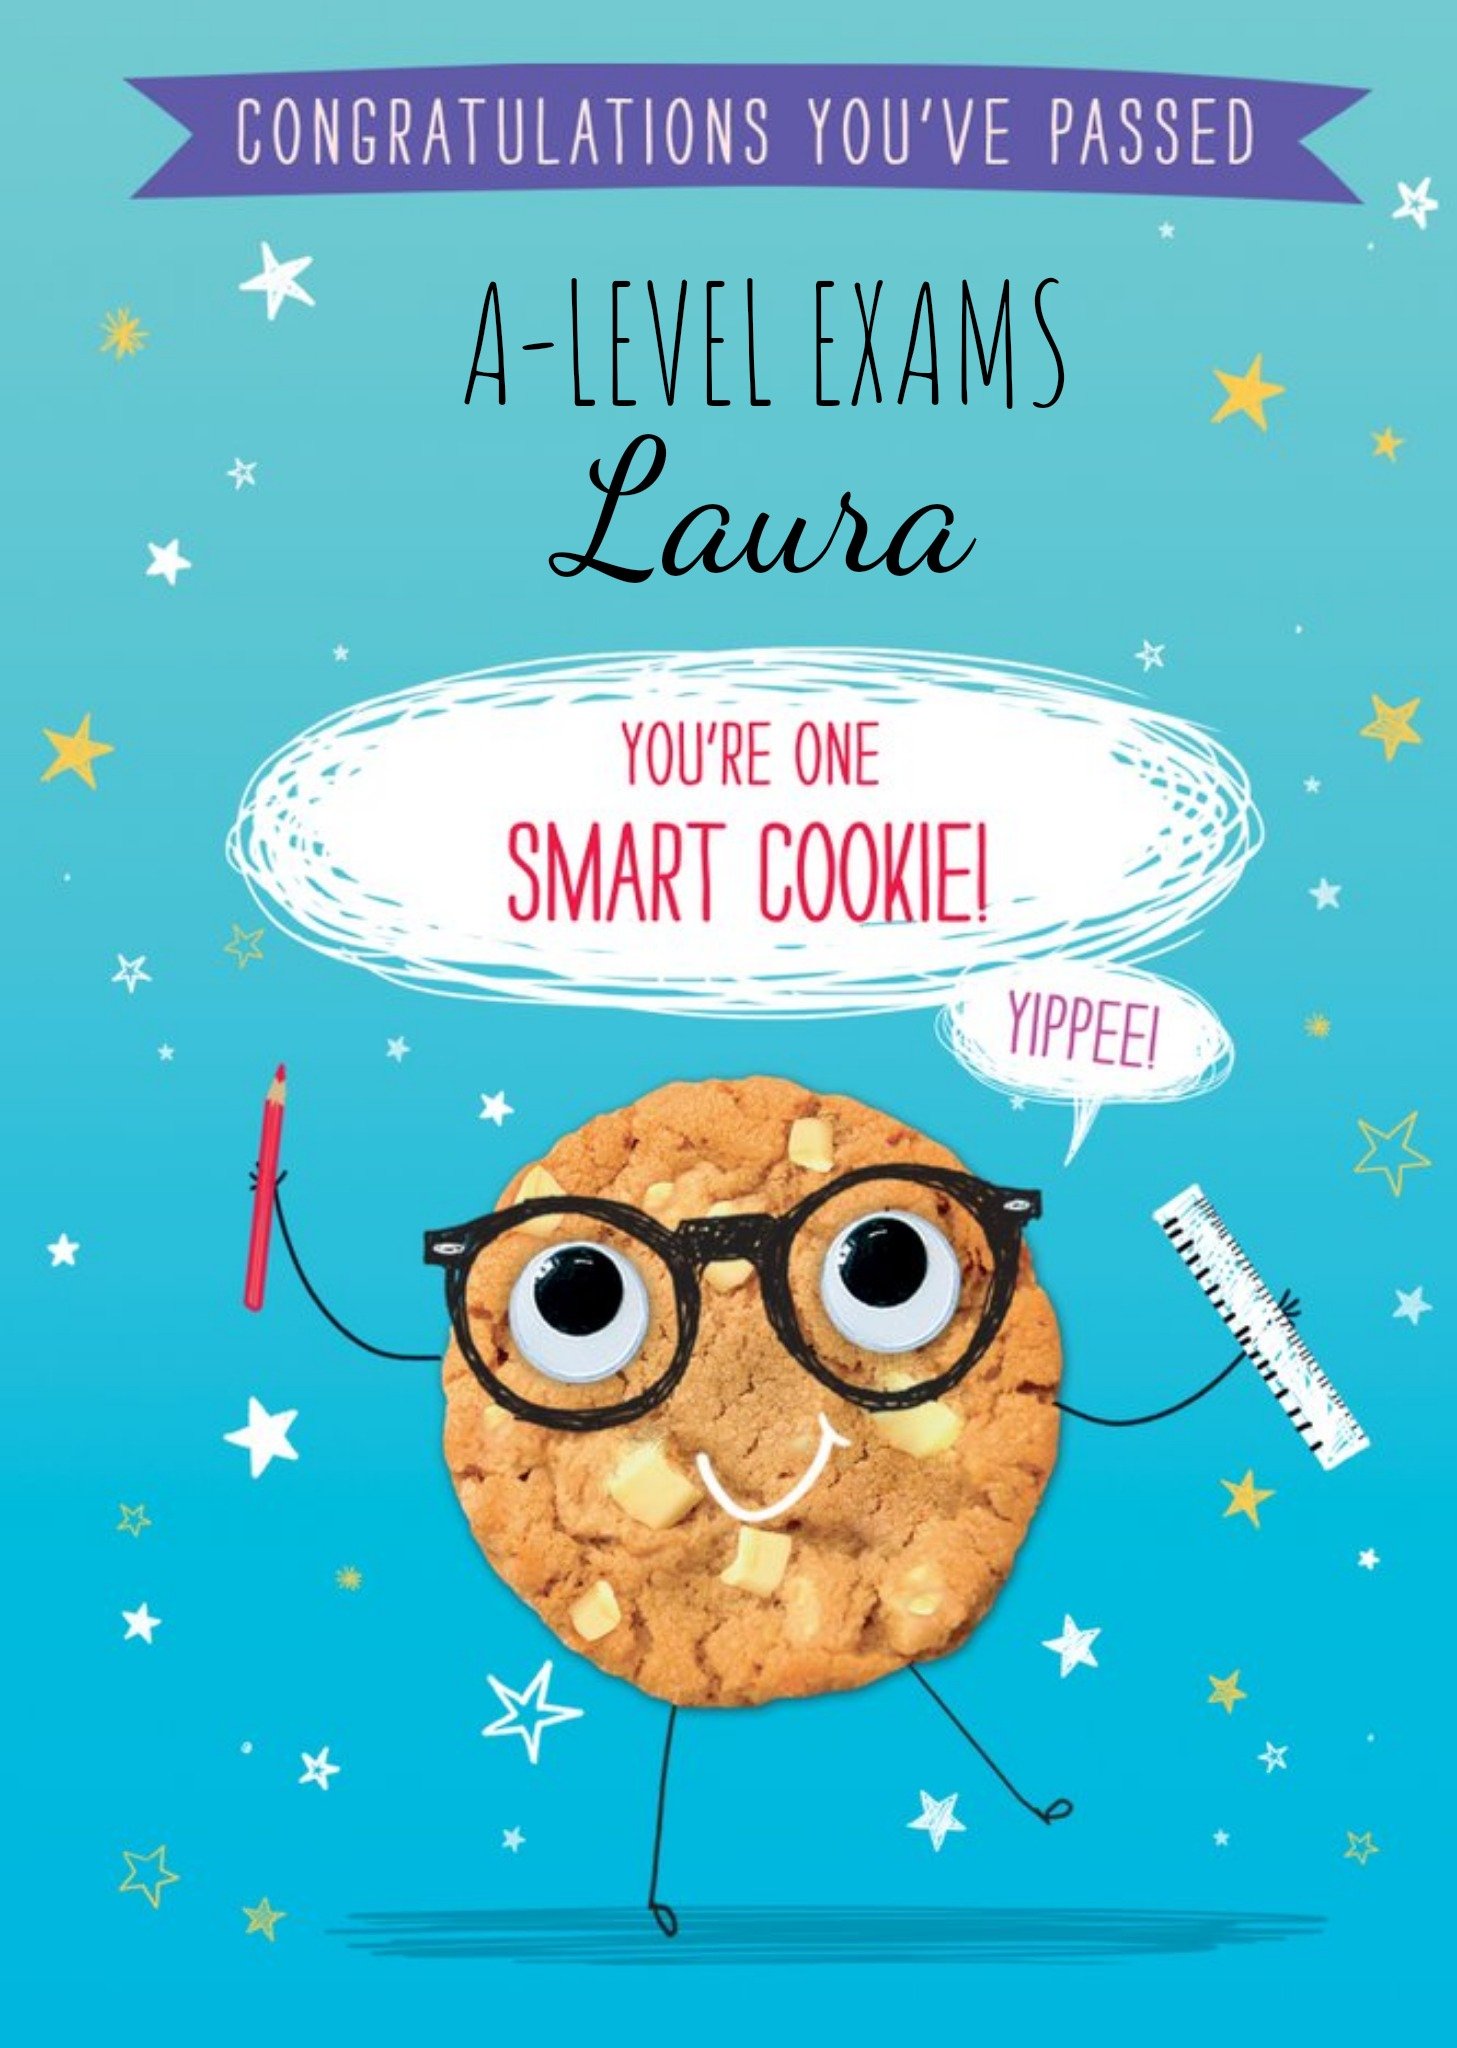 Moonpig Bright Illustration Of A Smart Cookie Congratulations You've Passed A Level Exams Ecard